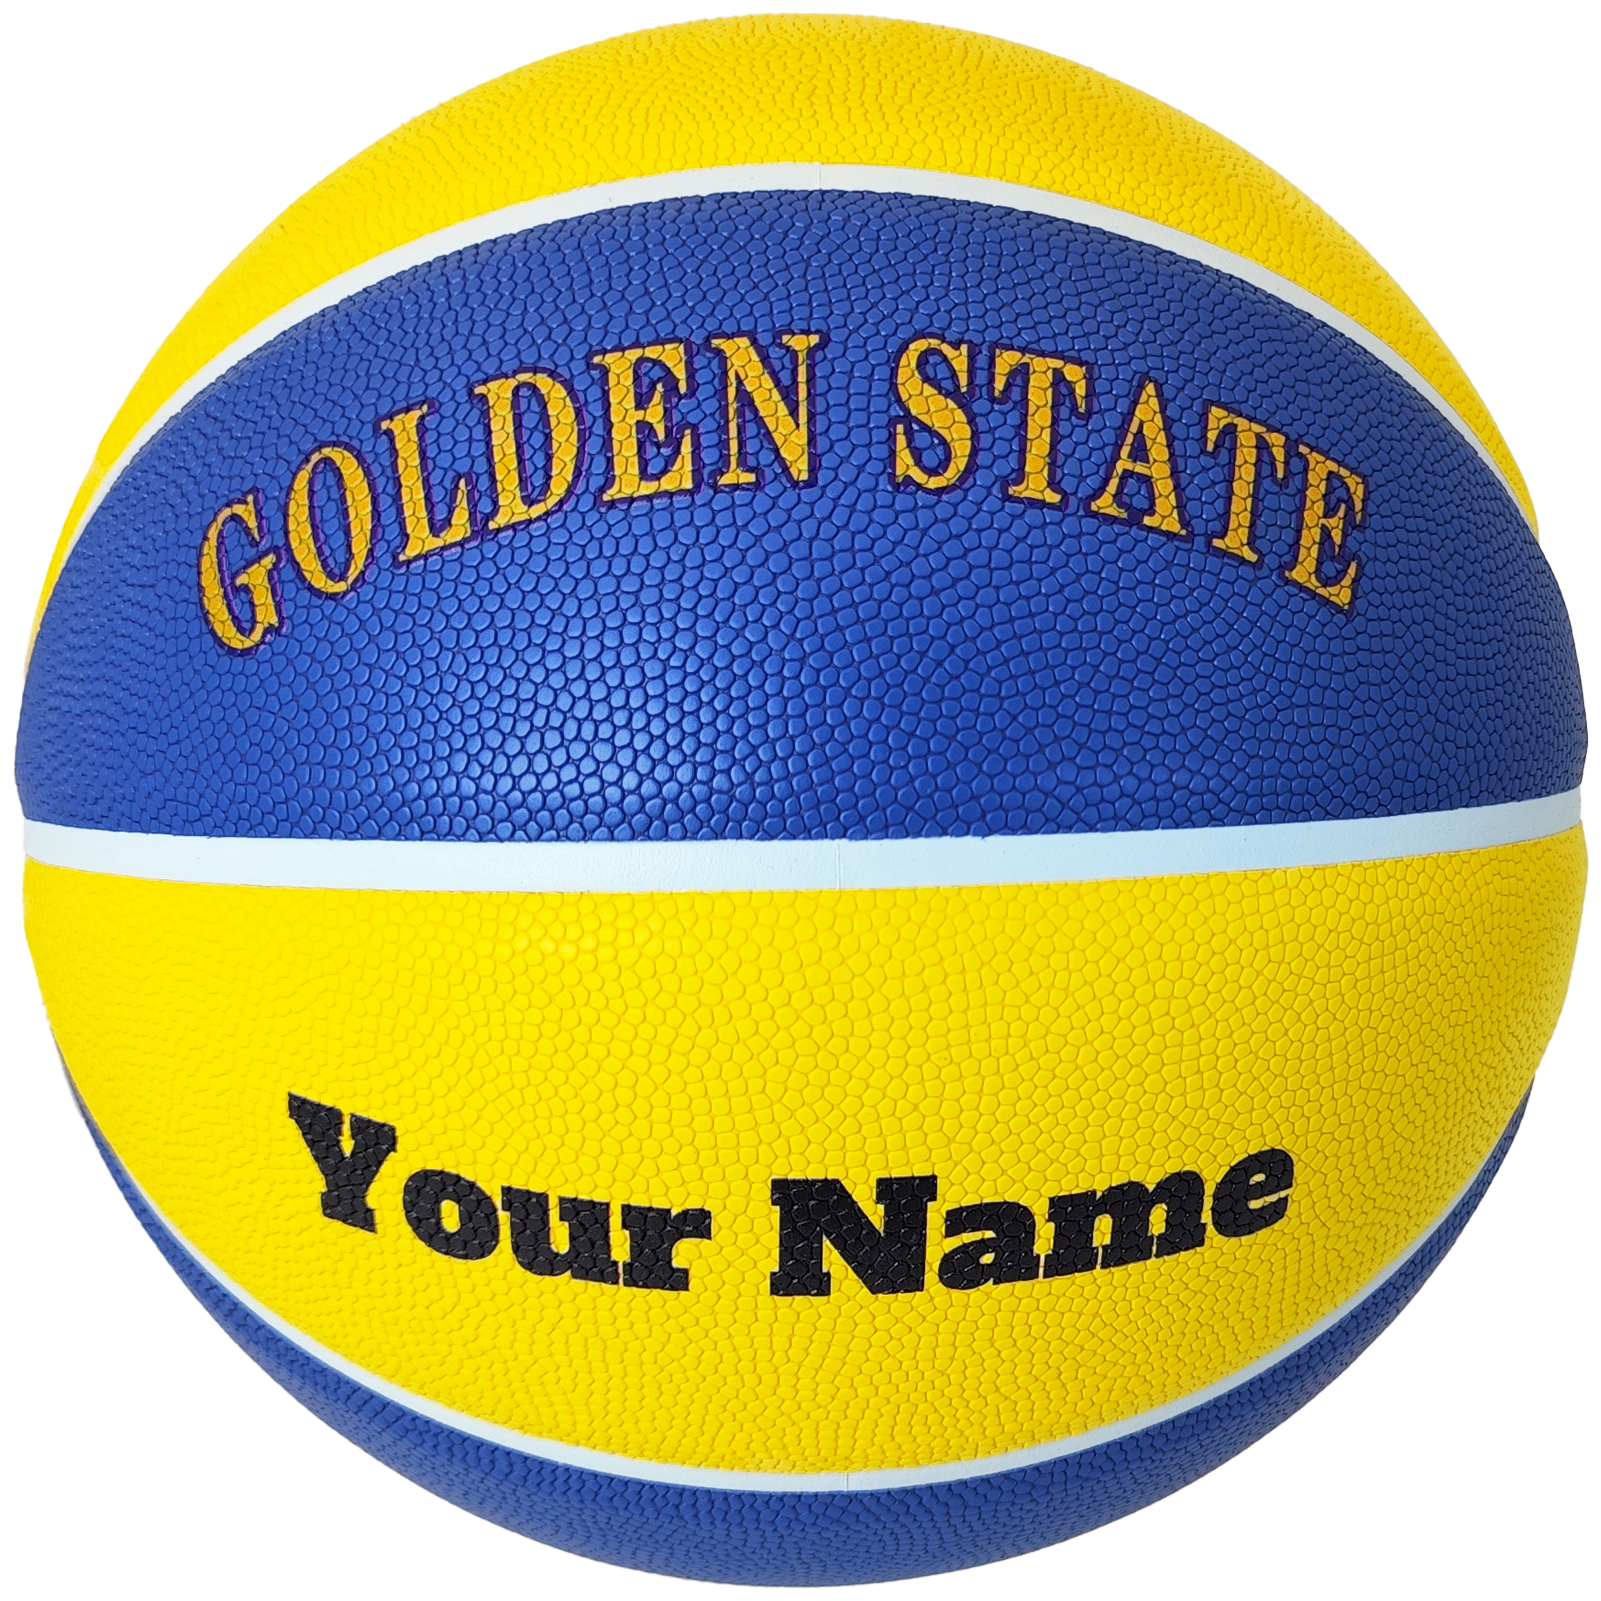 Personalized Indoor/Outdoor Basketball NBA Team Golden State  Size 5 - 27.5”, Size 6 - 28.5” and Size 7 - 29.5”